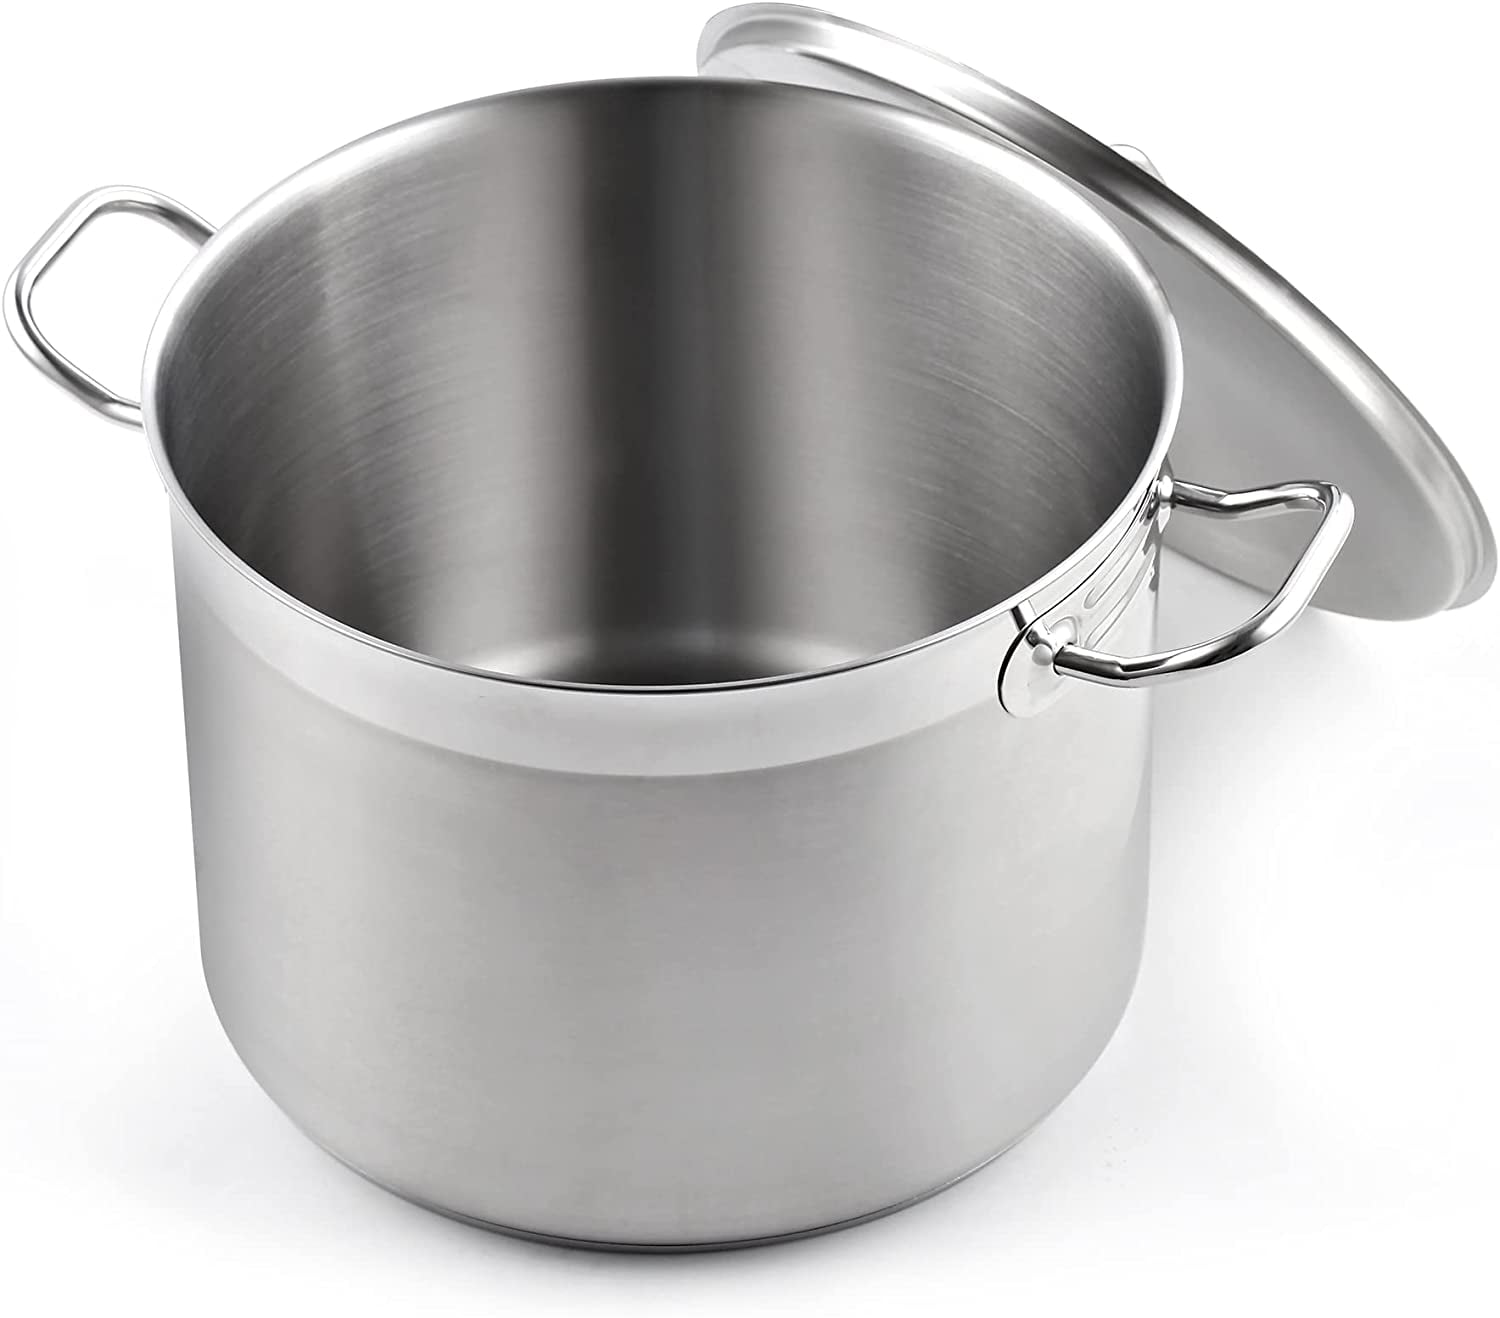 Professional Large Pot Pan Stainless Steel Stock Restaurant Home Kitchen  Cooking